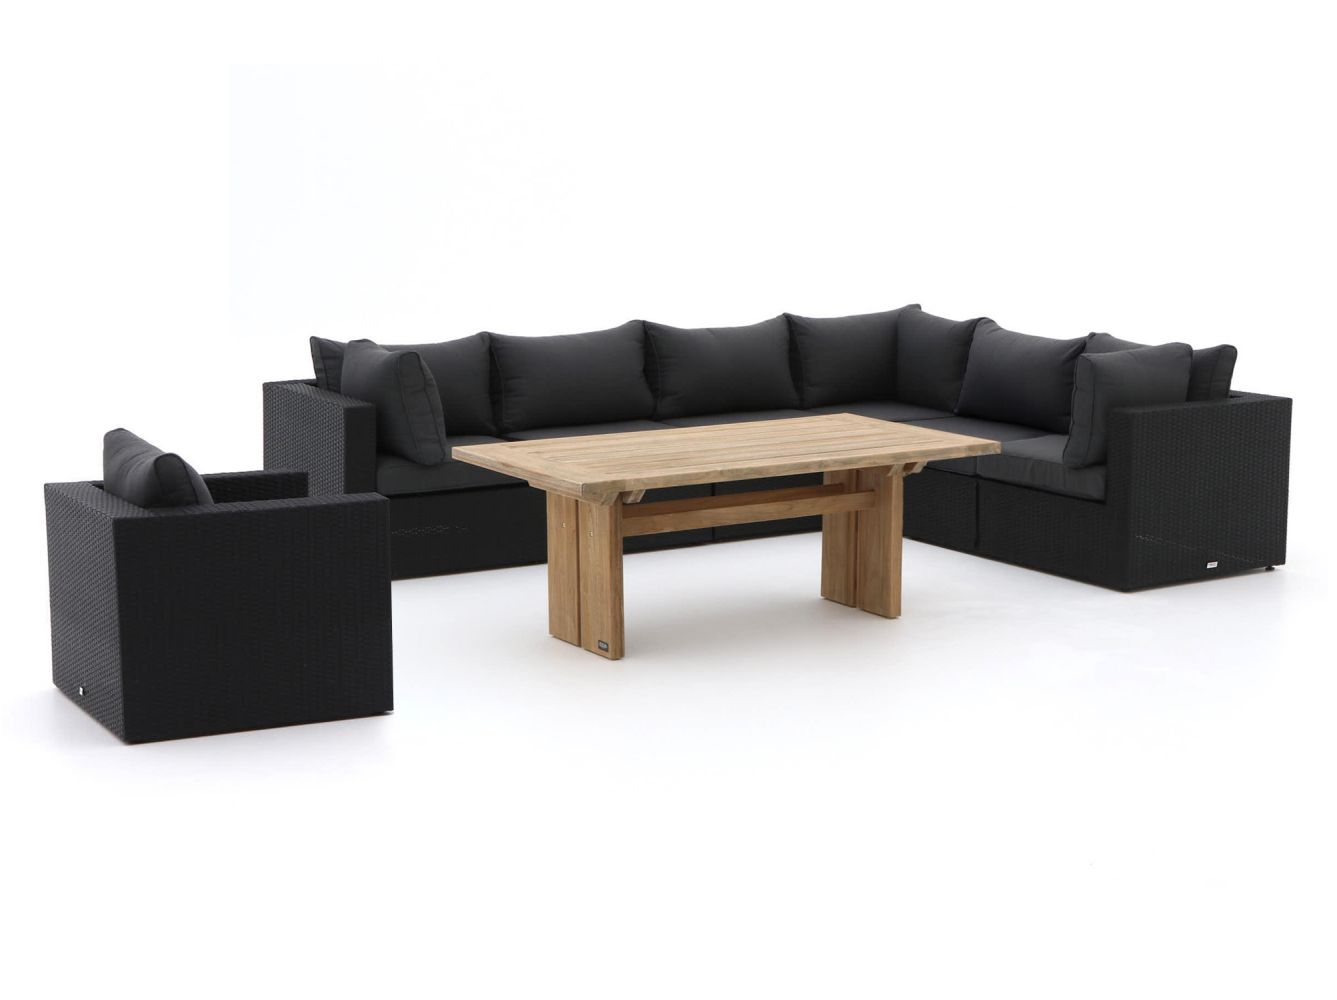 d2468ad331d3033d5a4dac14c831d584659b0ad7 114736 p01 krcviaeadwes5pg1 - Forza Barolo/ROUGH-L dining loungeset 8-delig